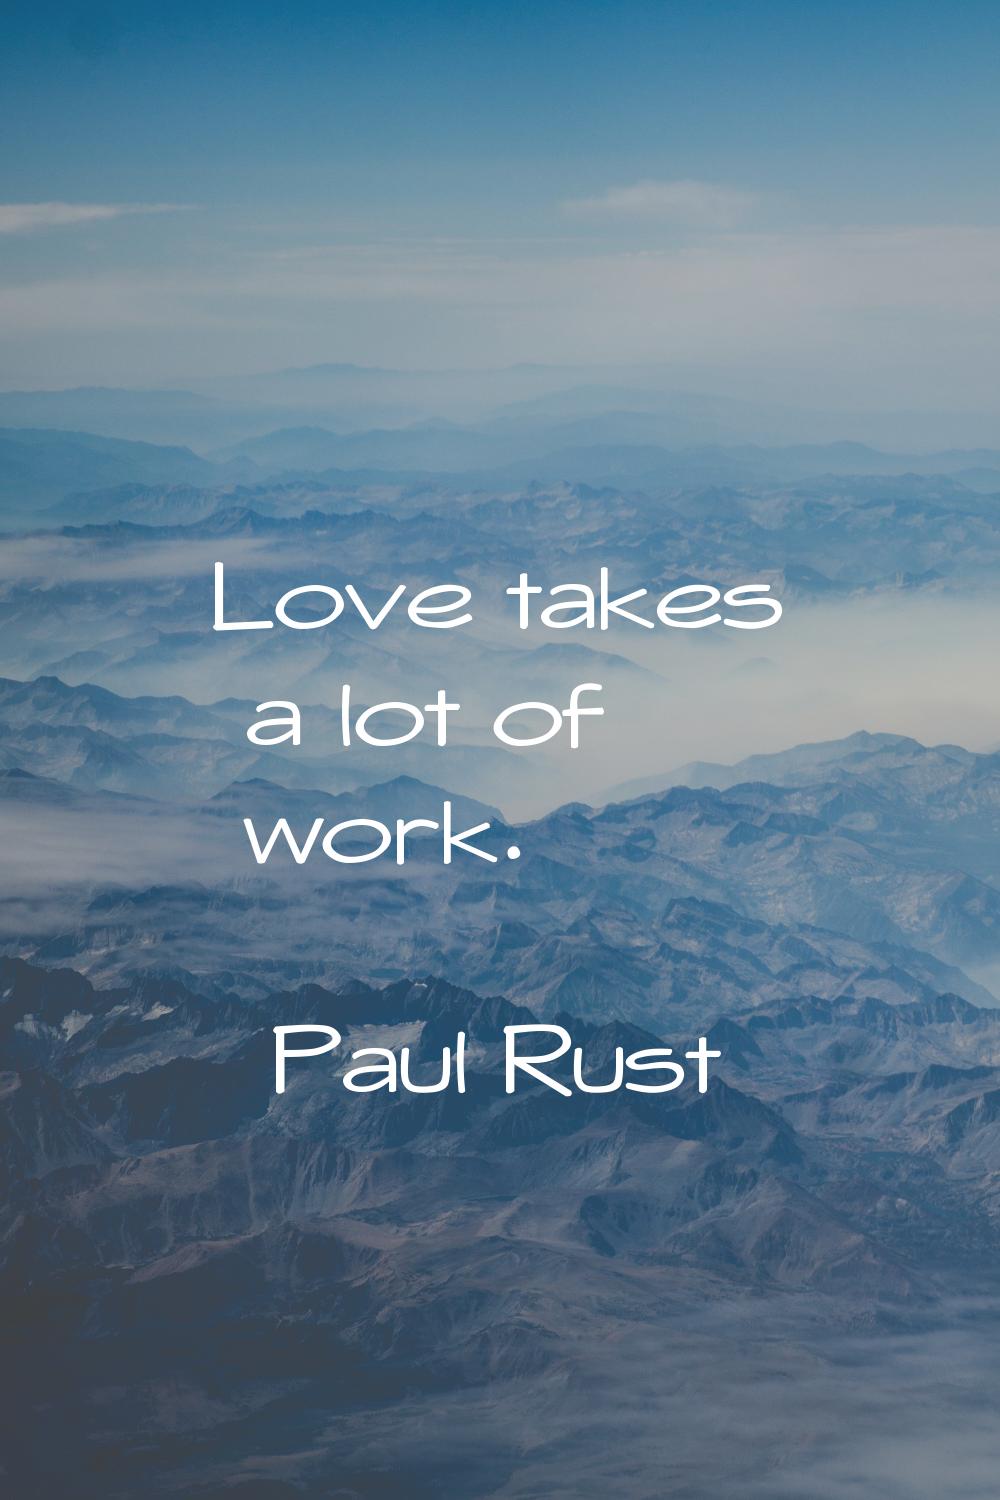 Love takes a lot of work.